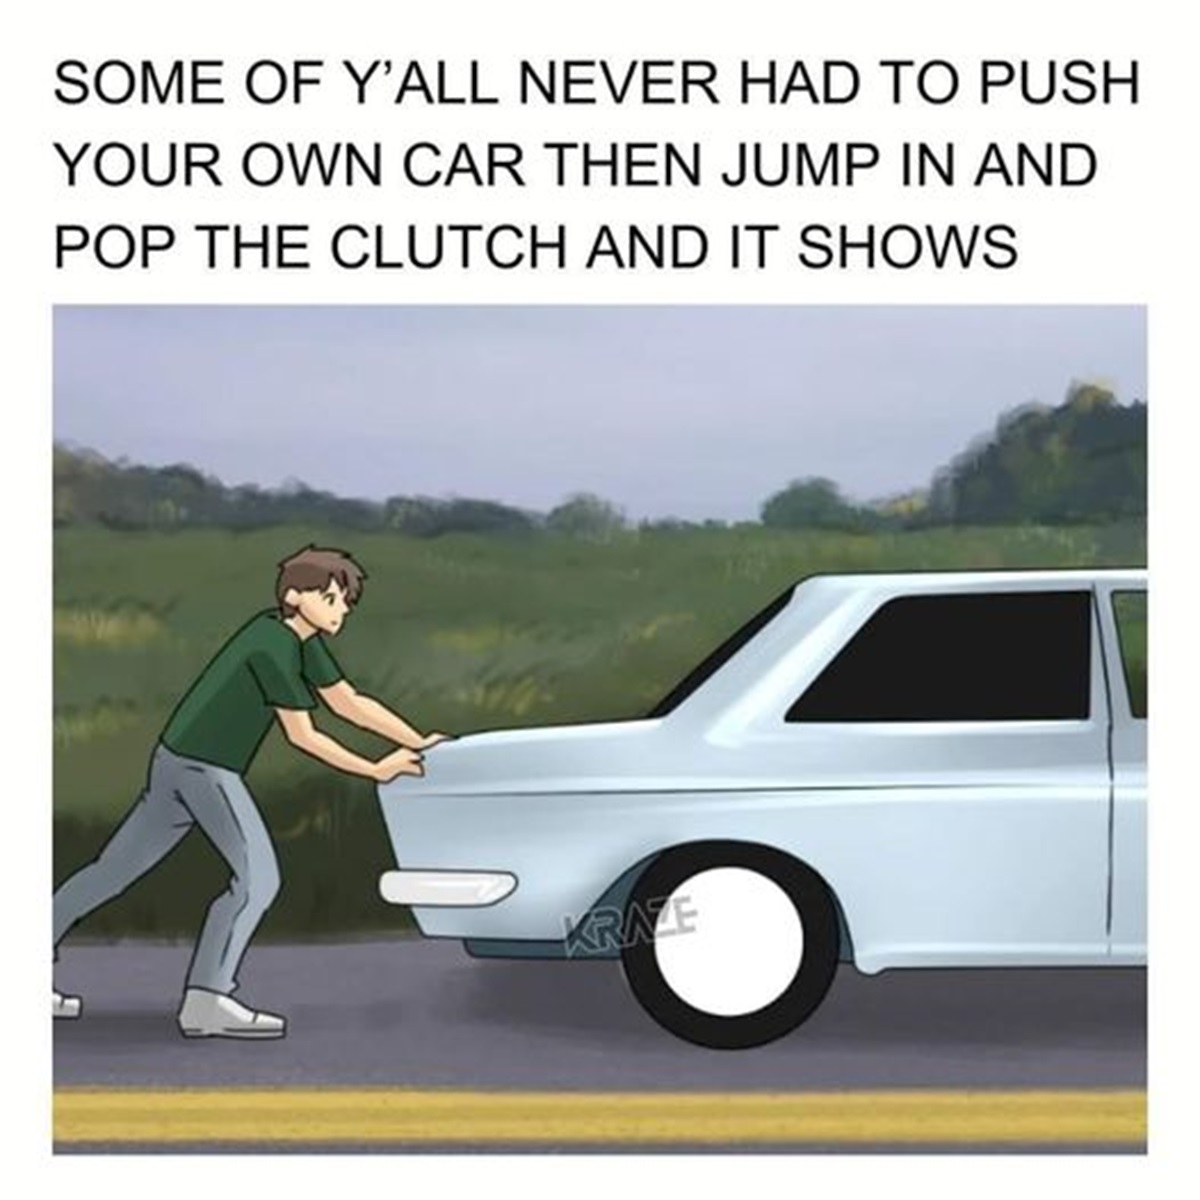 photo caption - Some Of Y'All Never Had To Push Your Own Car Then Jump In And Pop The Clutch And It Shows Kraze